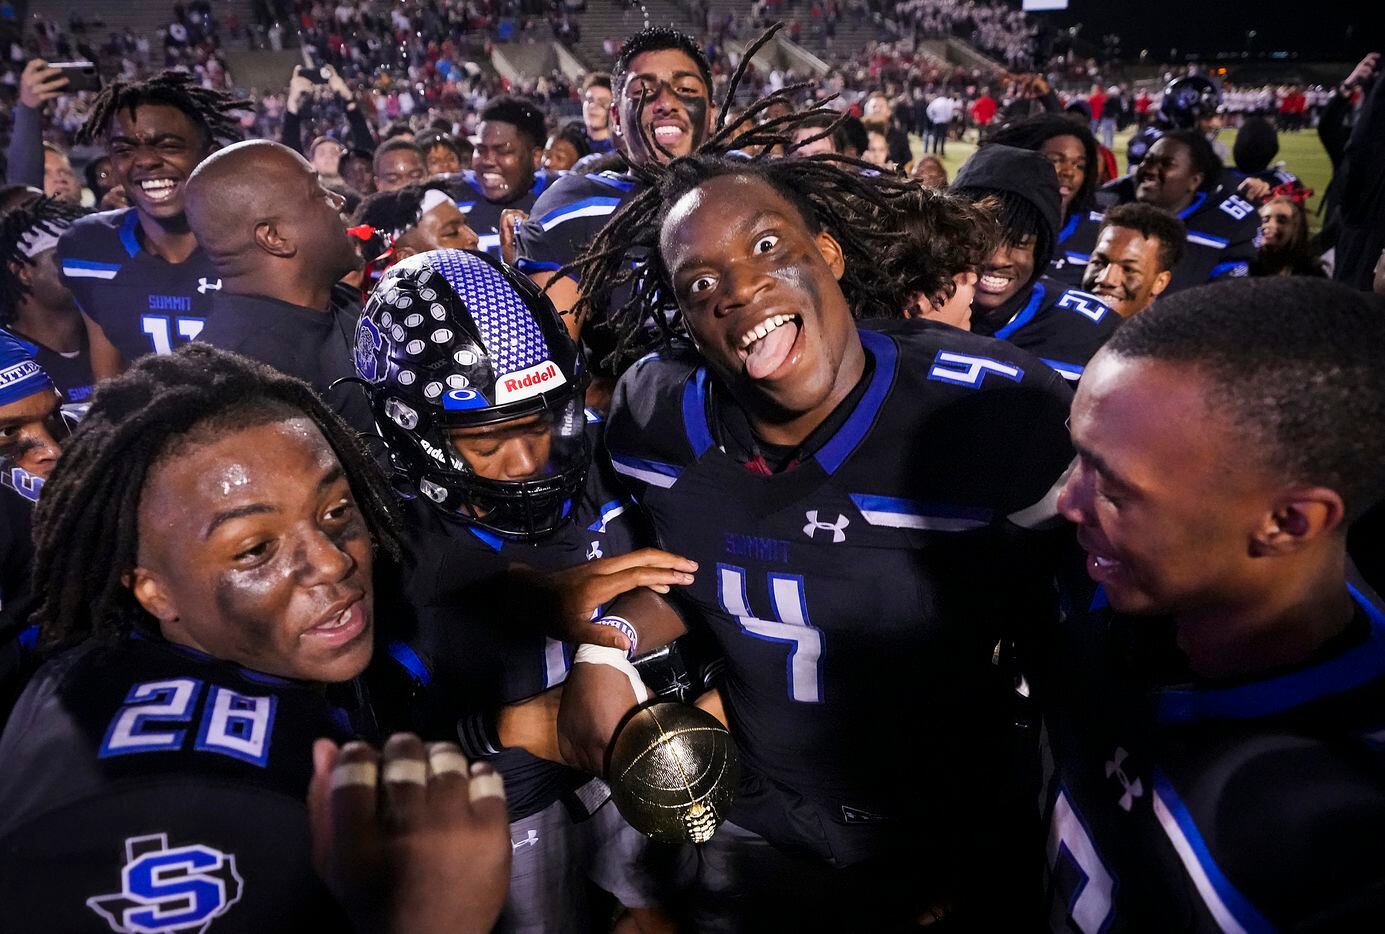 Mansfield Summit defensive lineman Joseph Adedire (4) celebrates with the game trophy after a victory over Colleyville Heritage in the Class 5A Division I Region I final on Friday, Dec. 3, 2021, in North Richland Hills, Texas. (Smiley N. Pool/The Dallas Morning News)